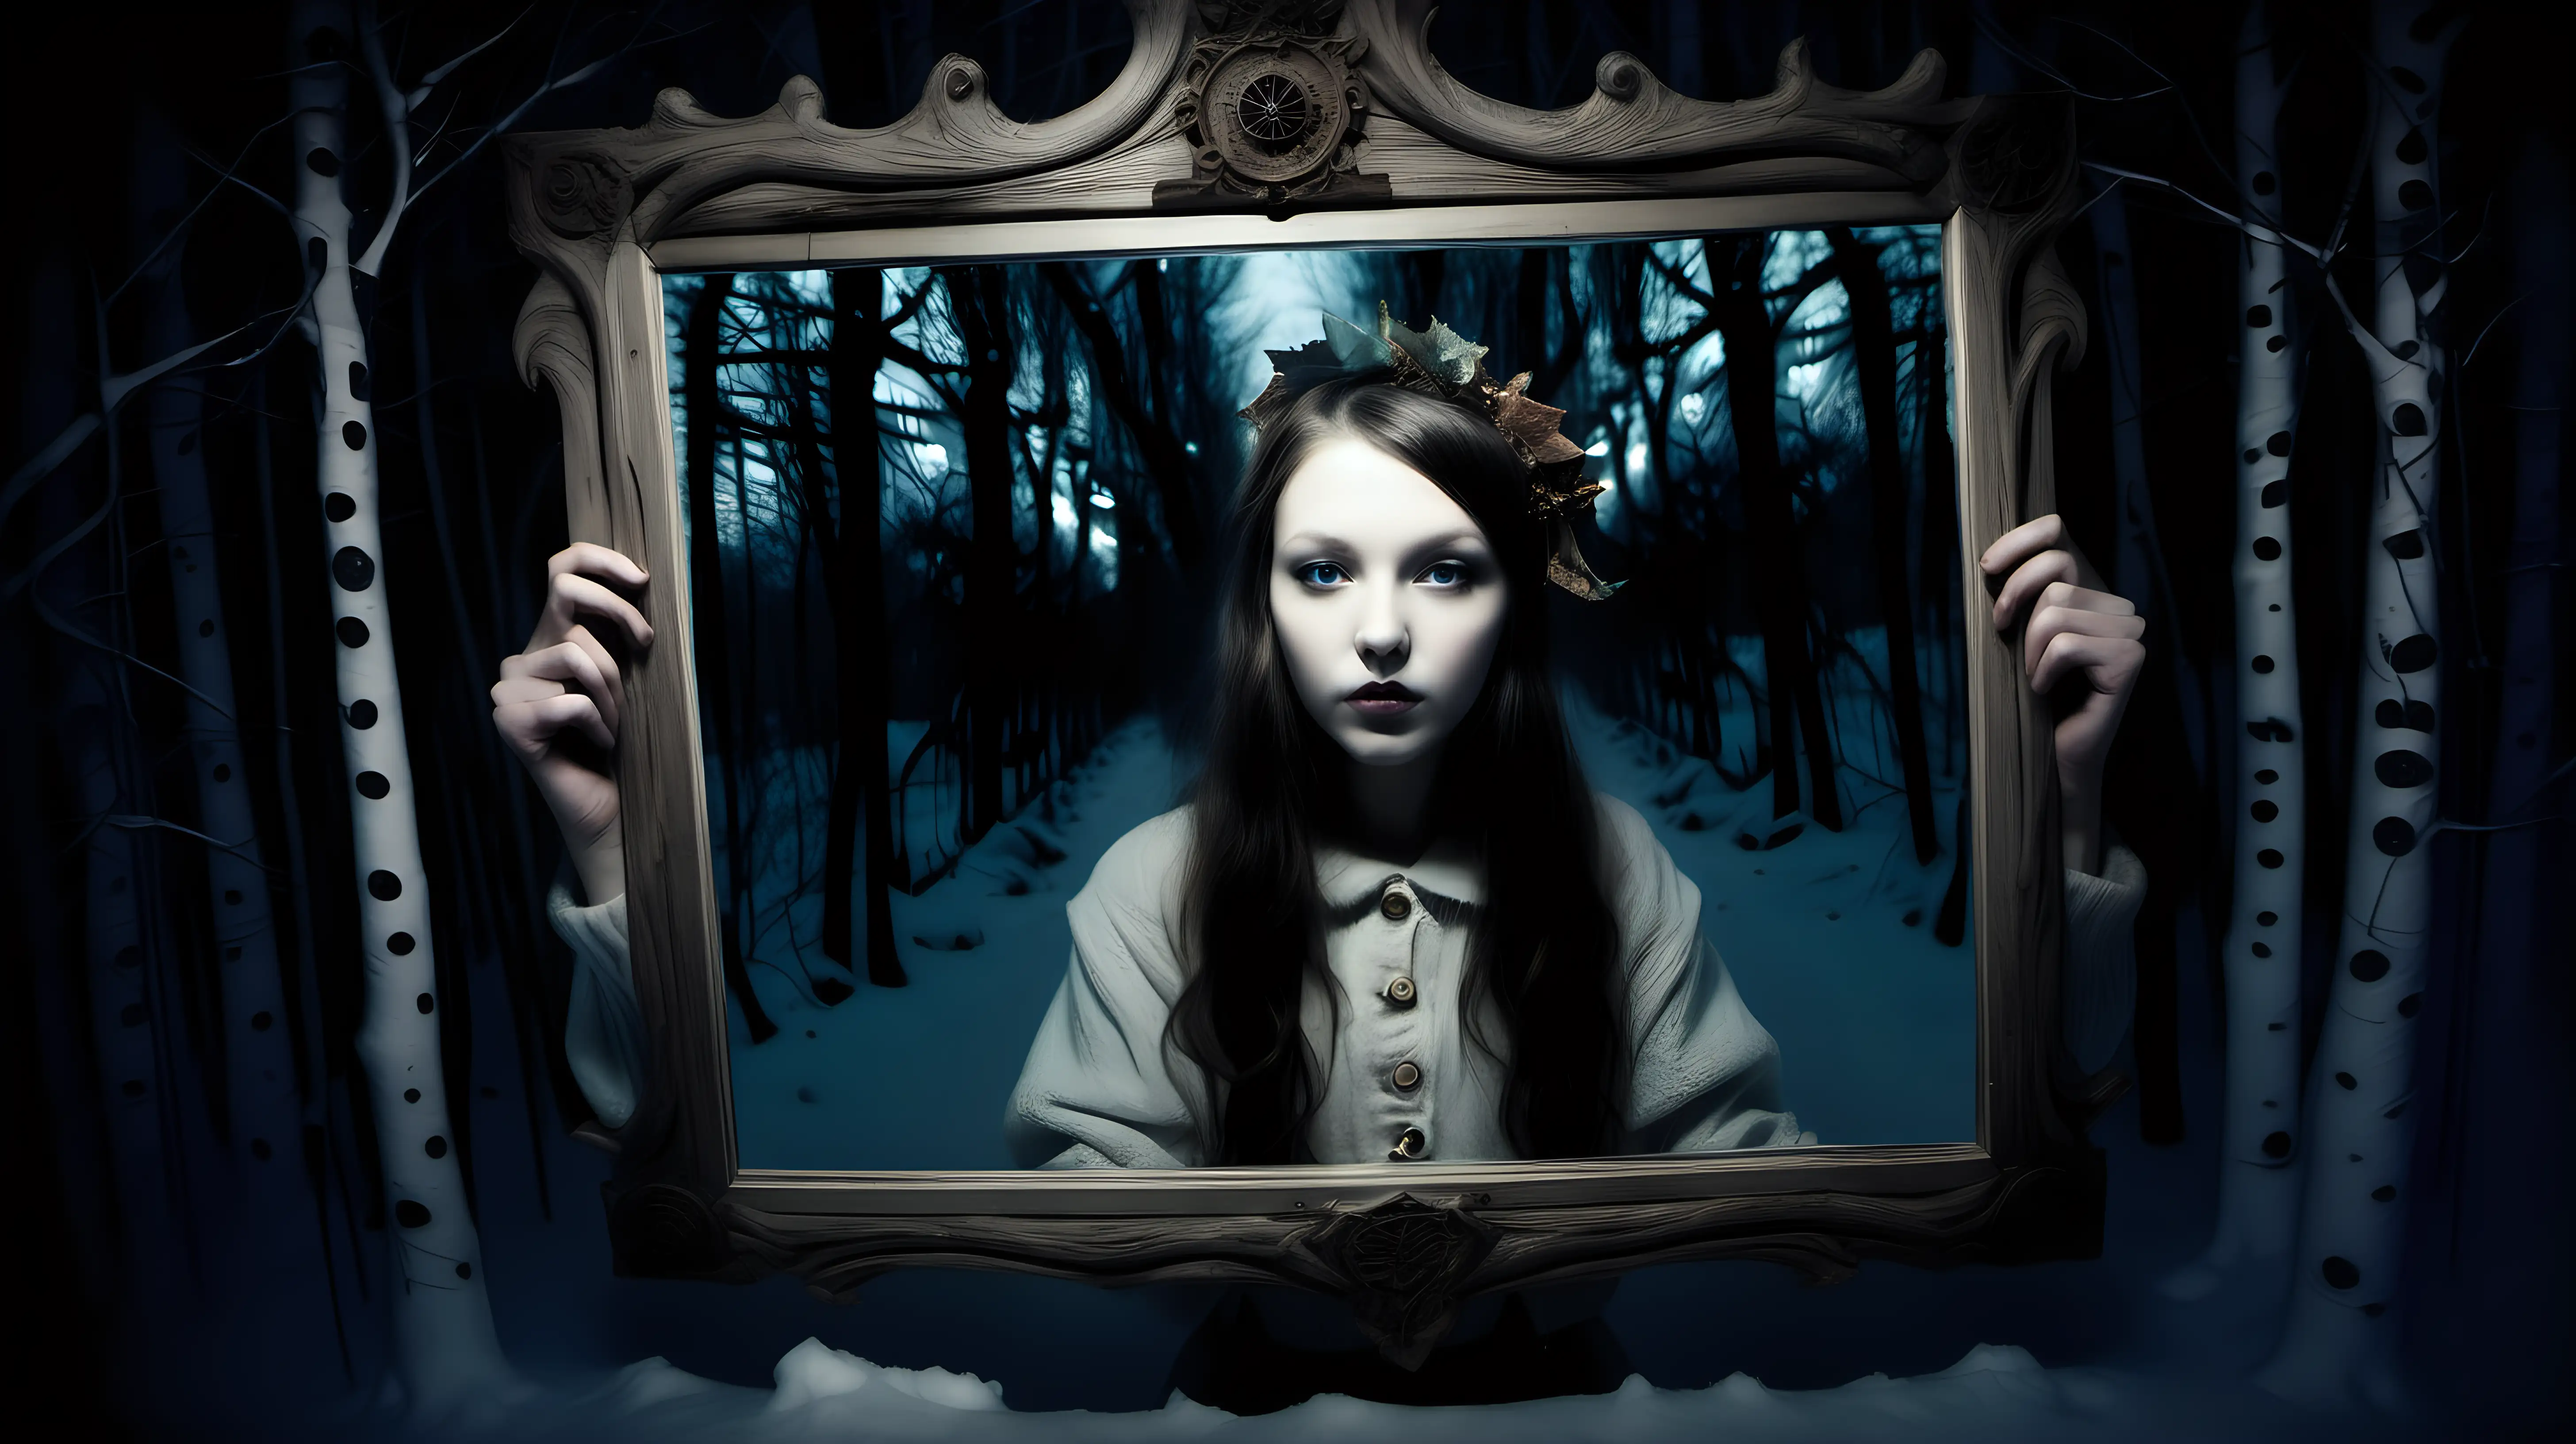 Enigmatic Girl Lost in Winter Woods with Magical Lantern Behind Mirrors